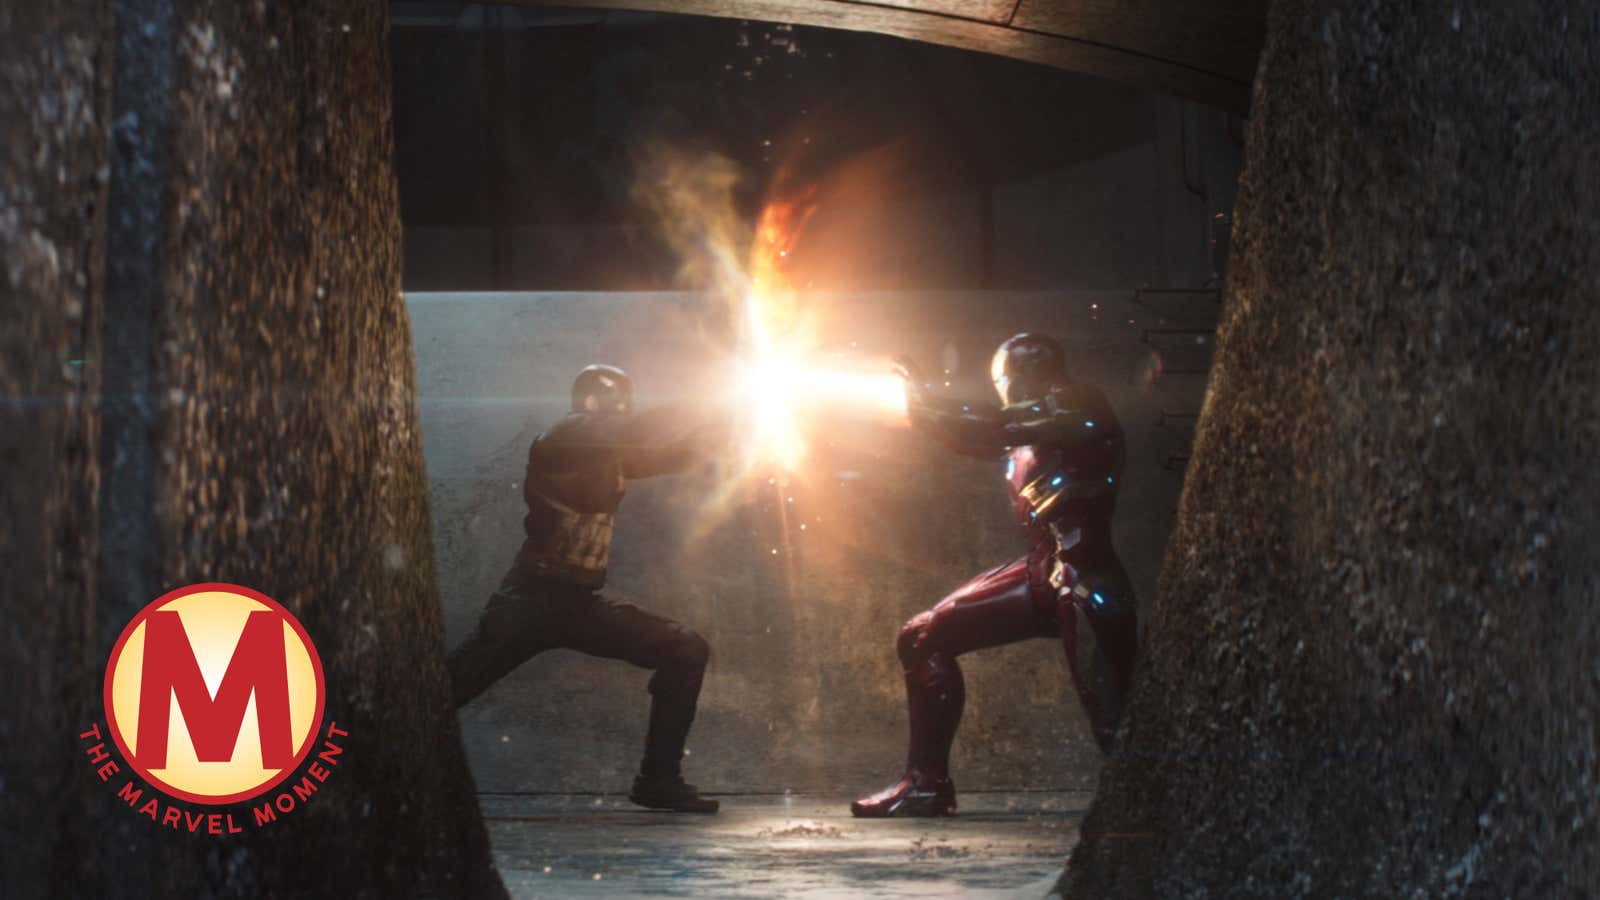 Captain America fights Iron Man, and the MCU for once gets a painfully personal climax